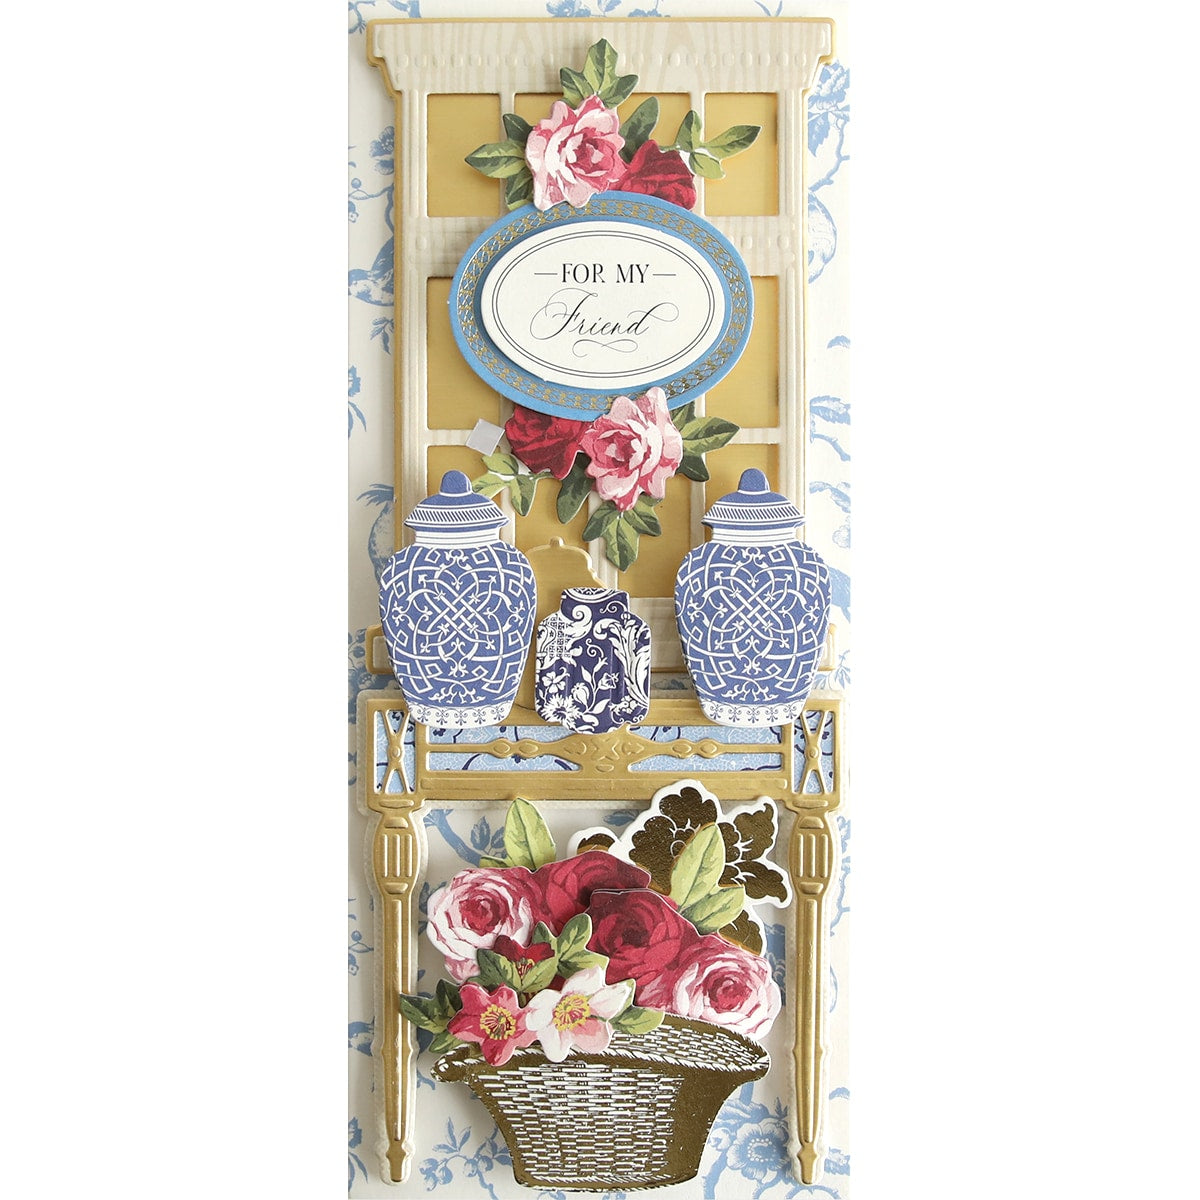 a card with a basket of flowers and vases.